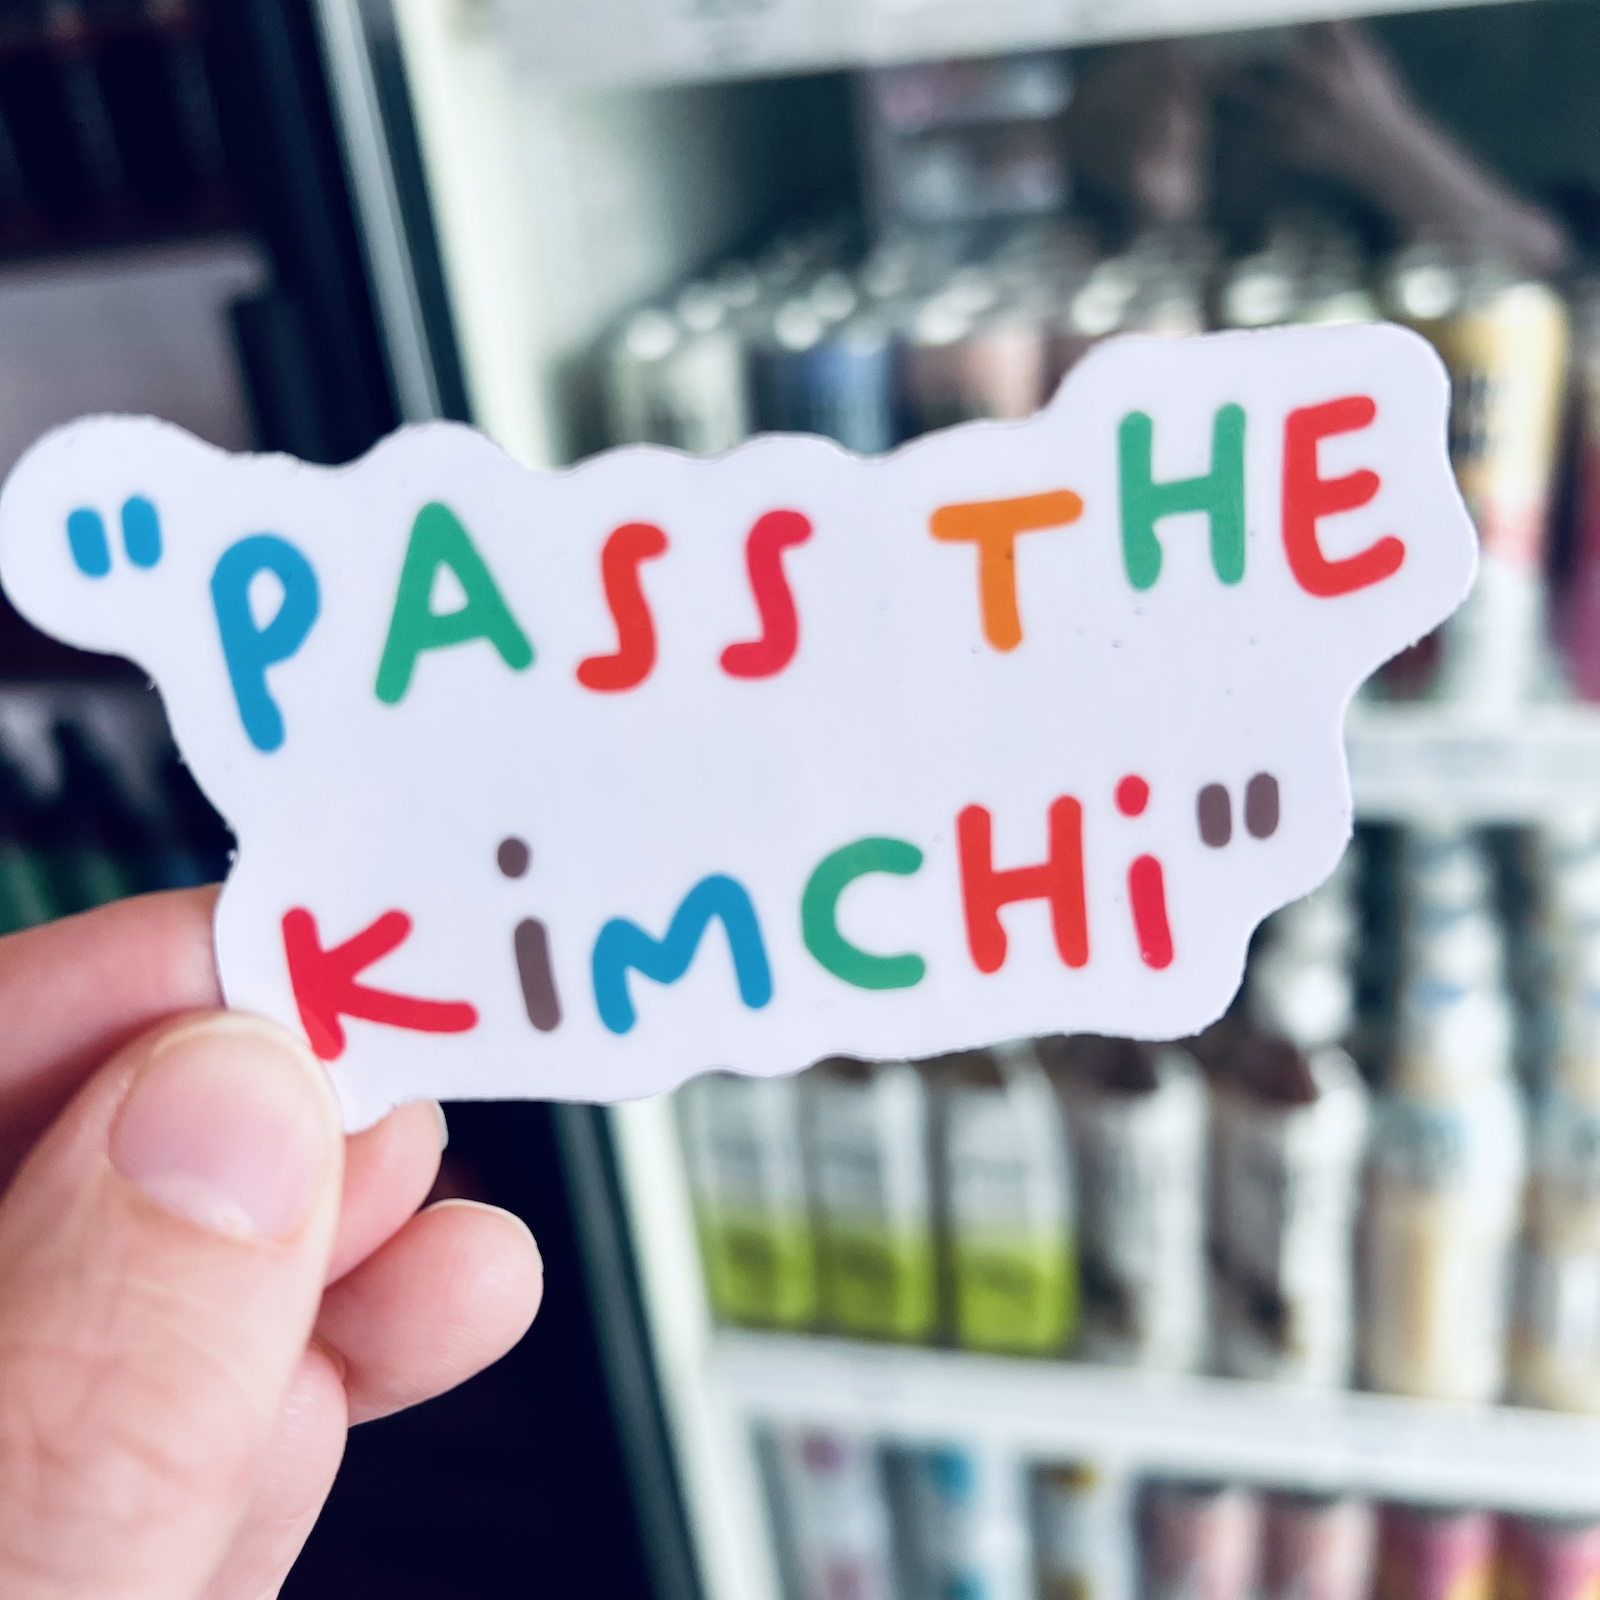 True Kimchi works with local farms and food producers to source their produce.